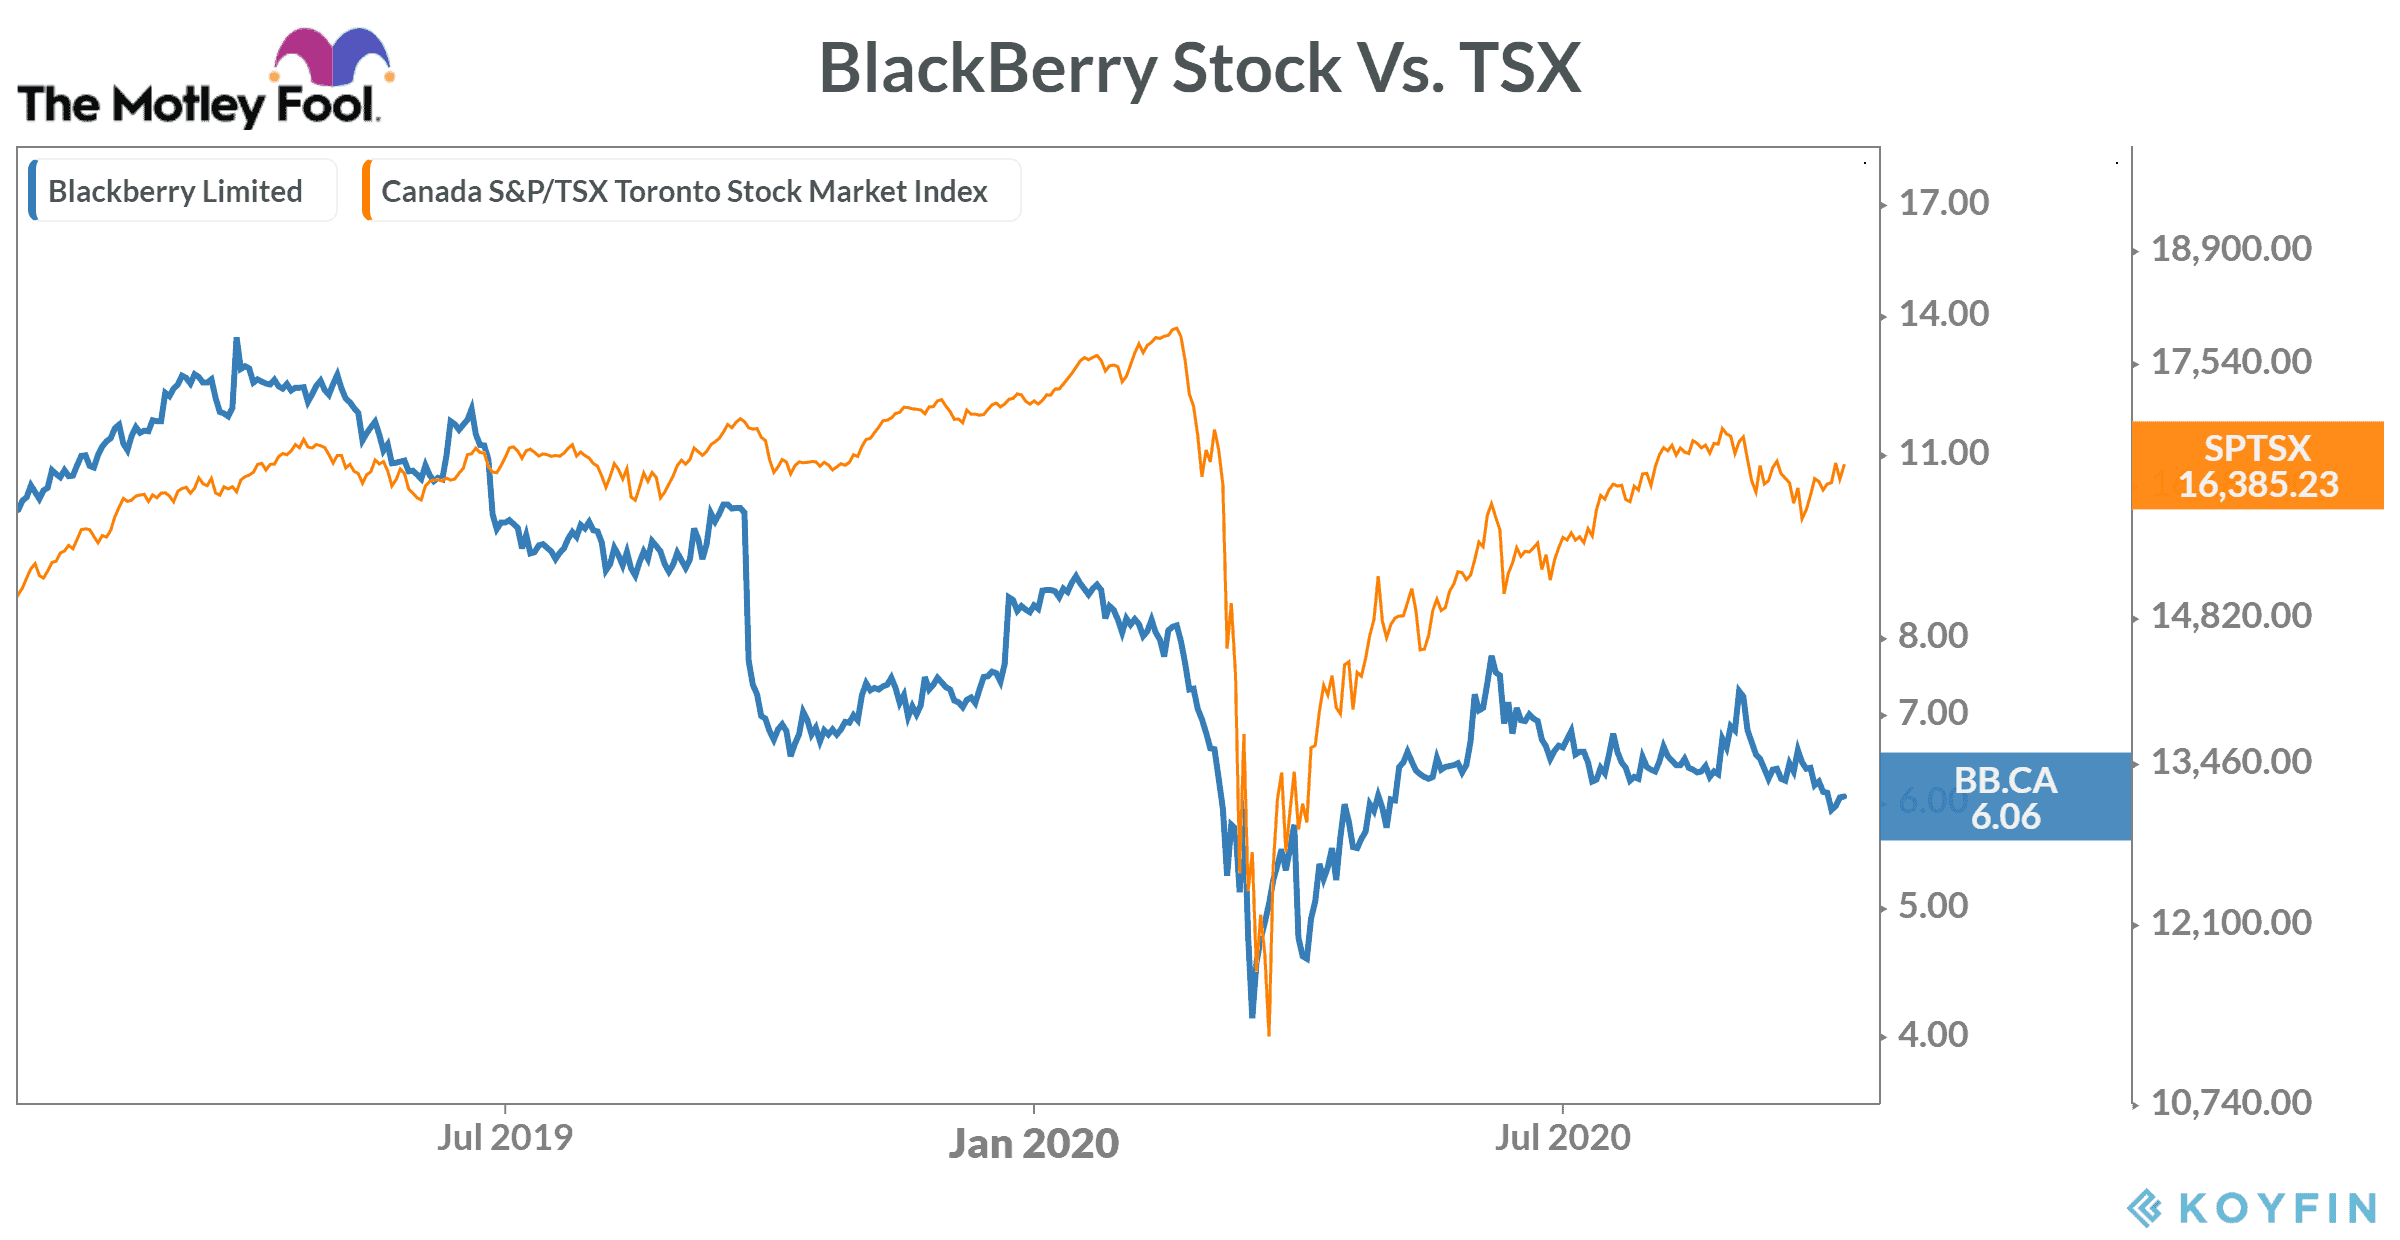 BlackBerry and TSX movement